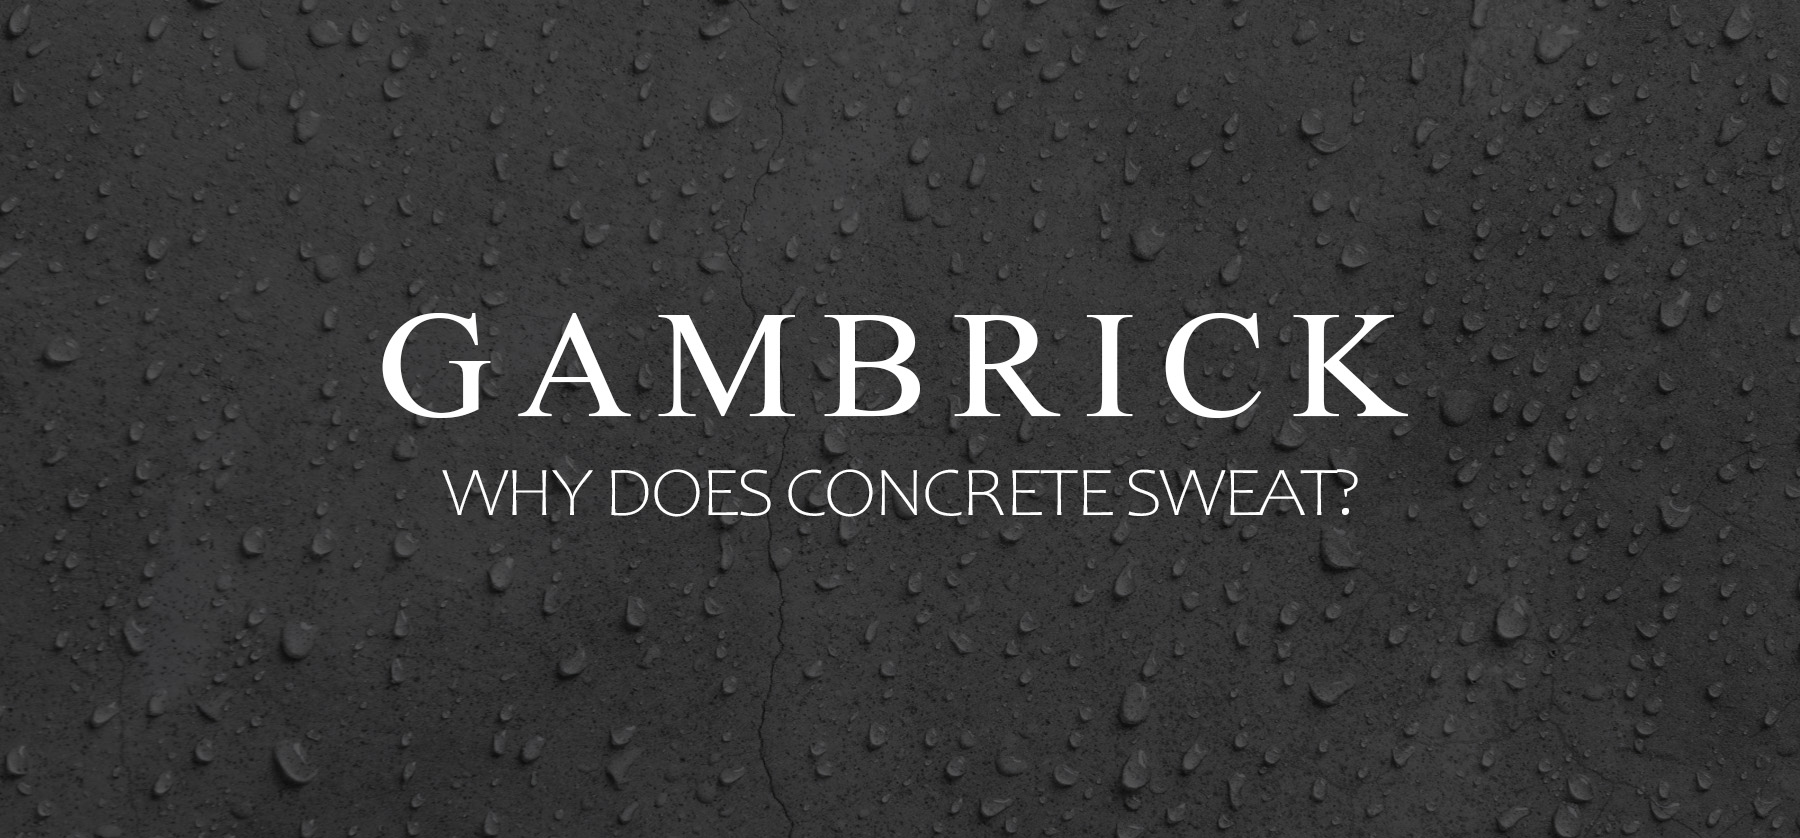 why does concrete sweat?